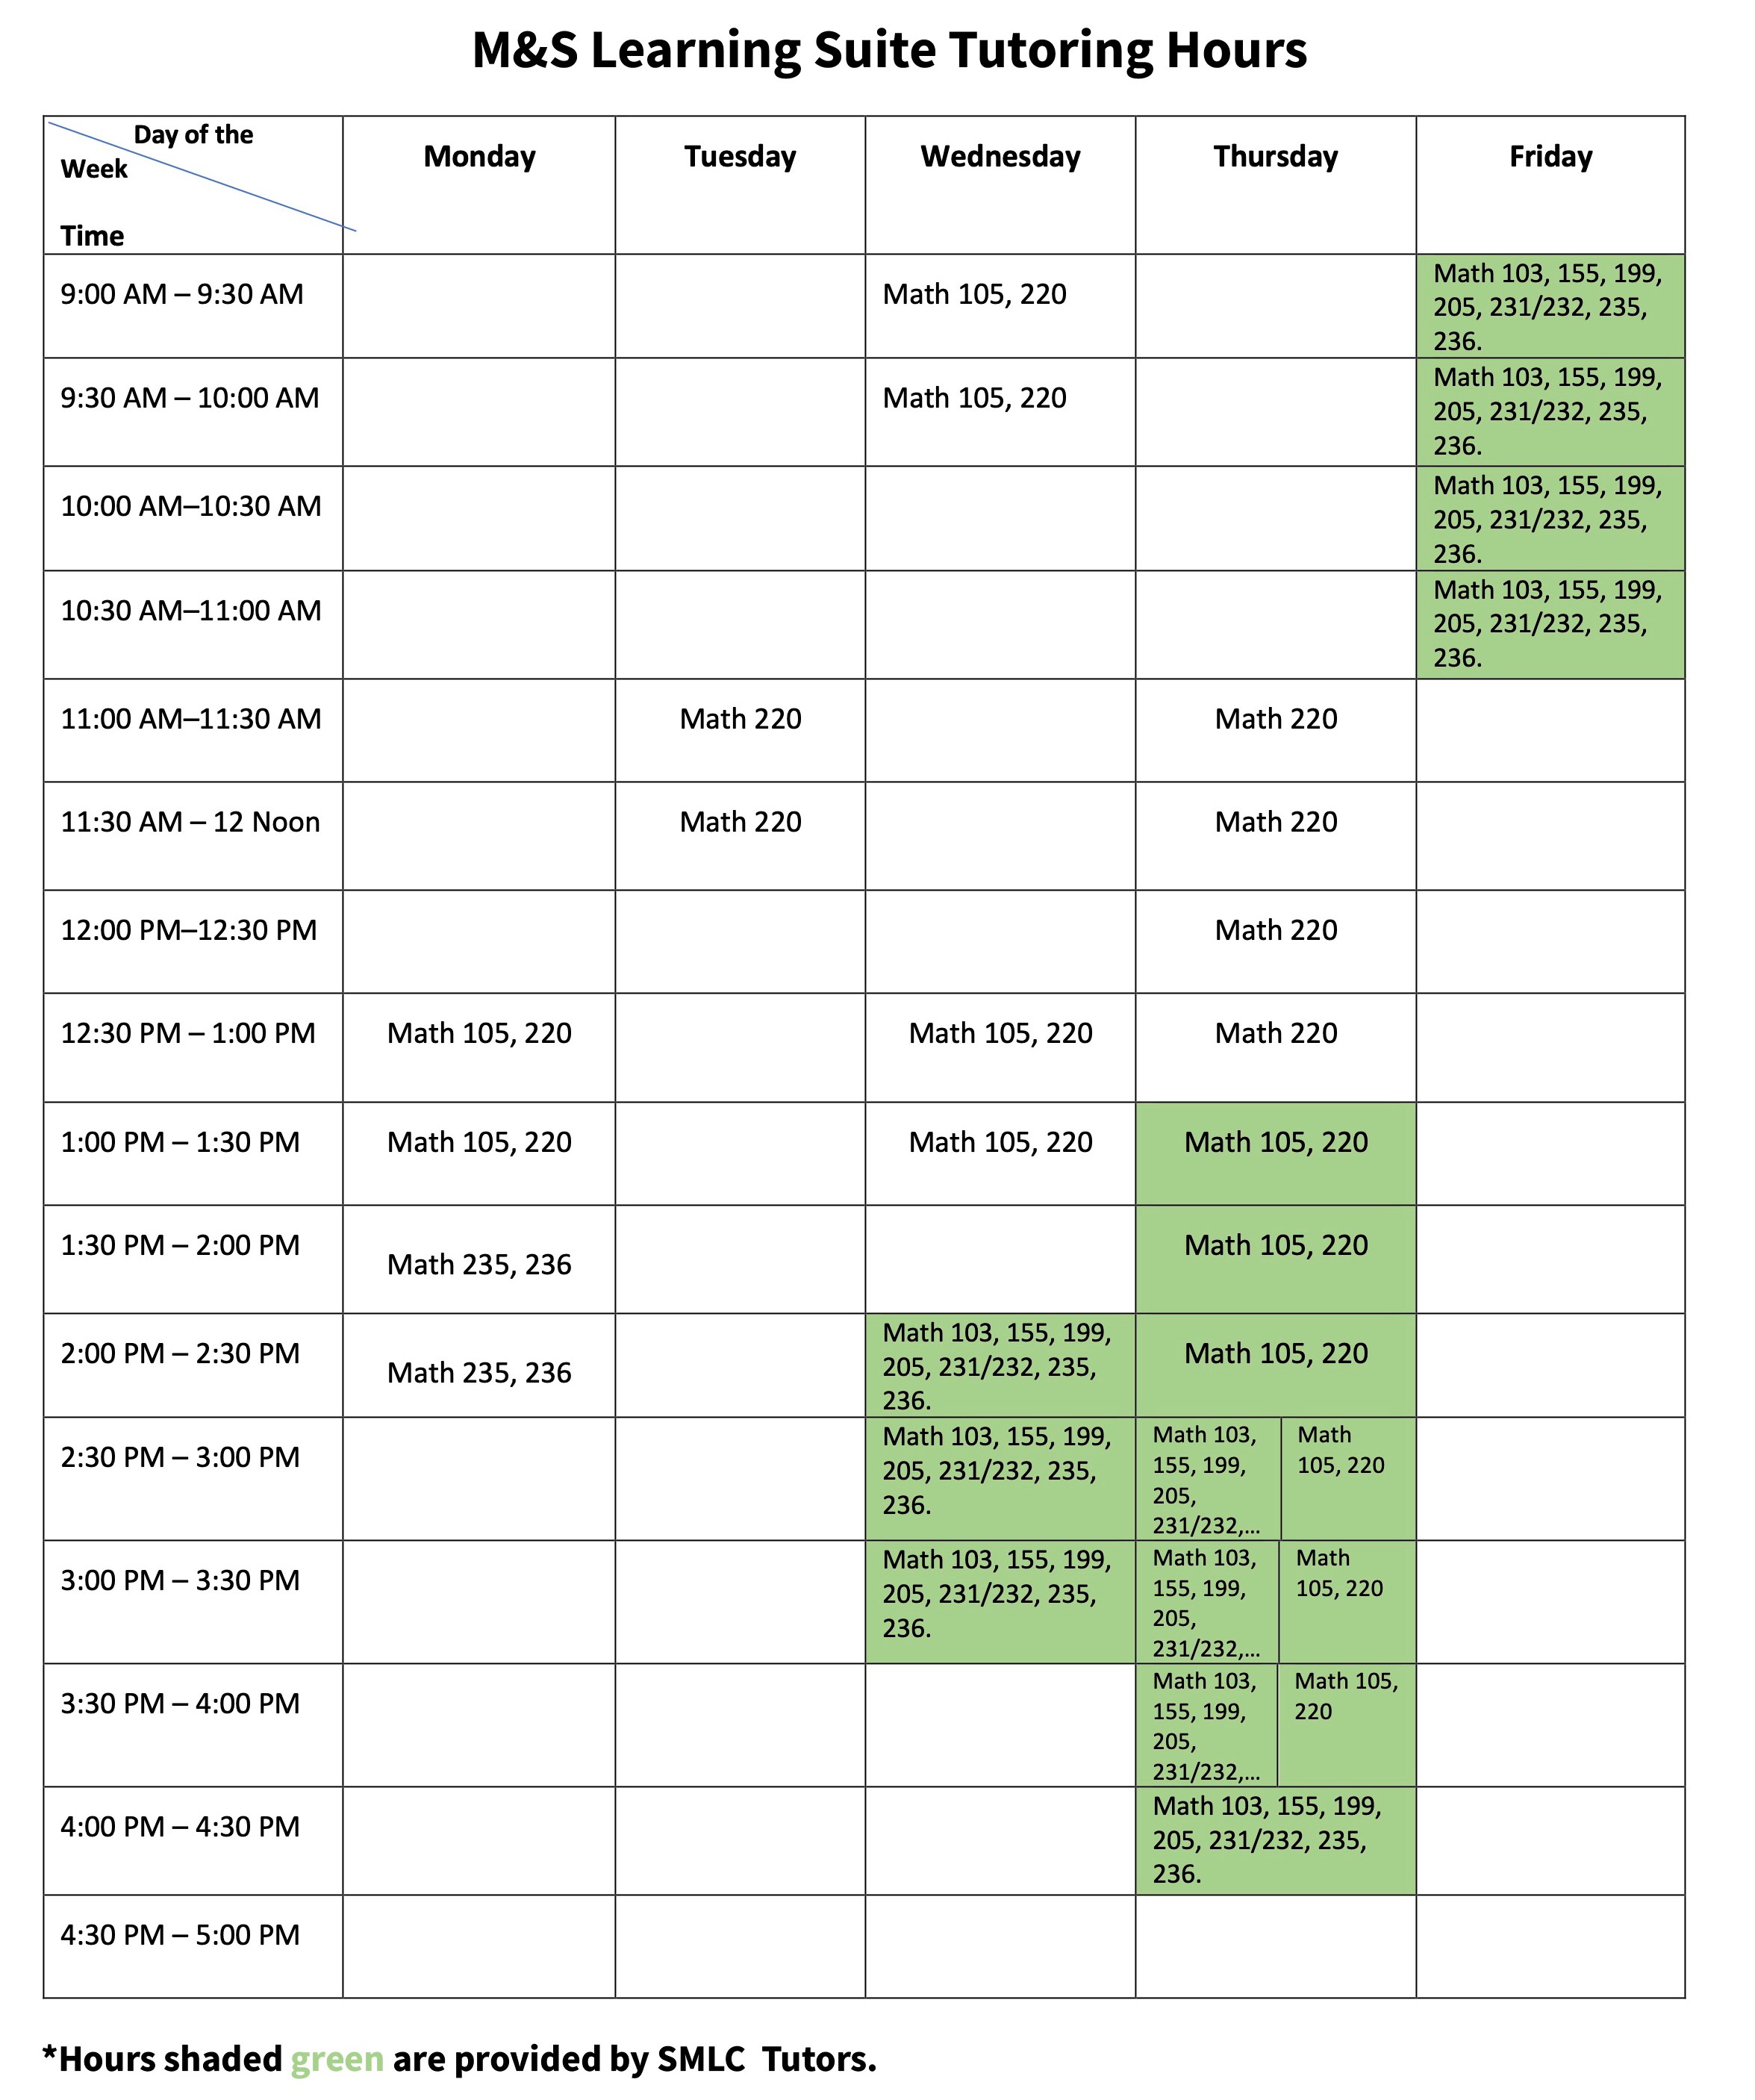 ms_learning_suite_schedule1.jpg